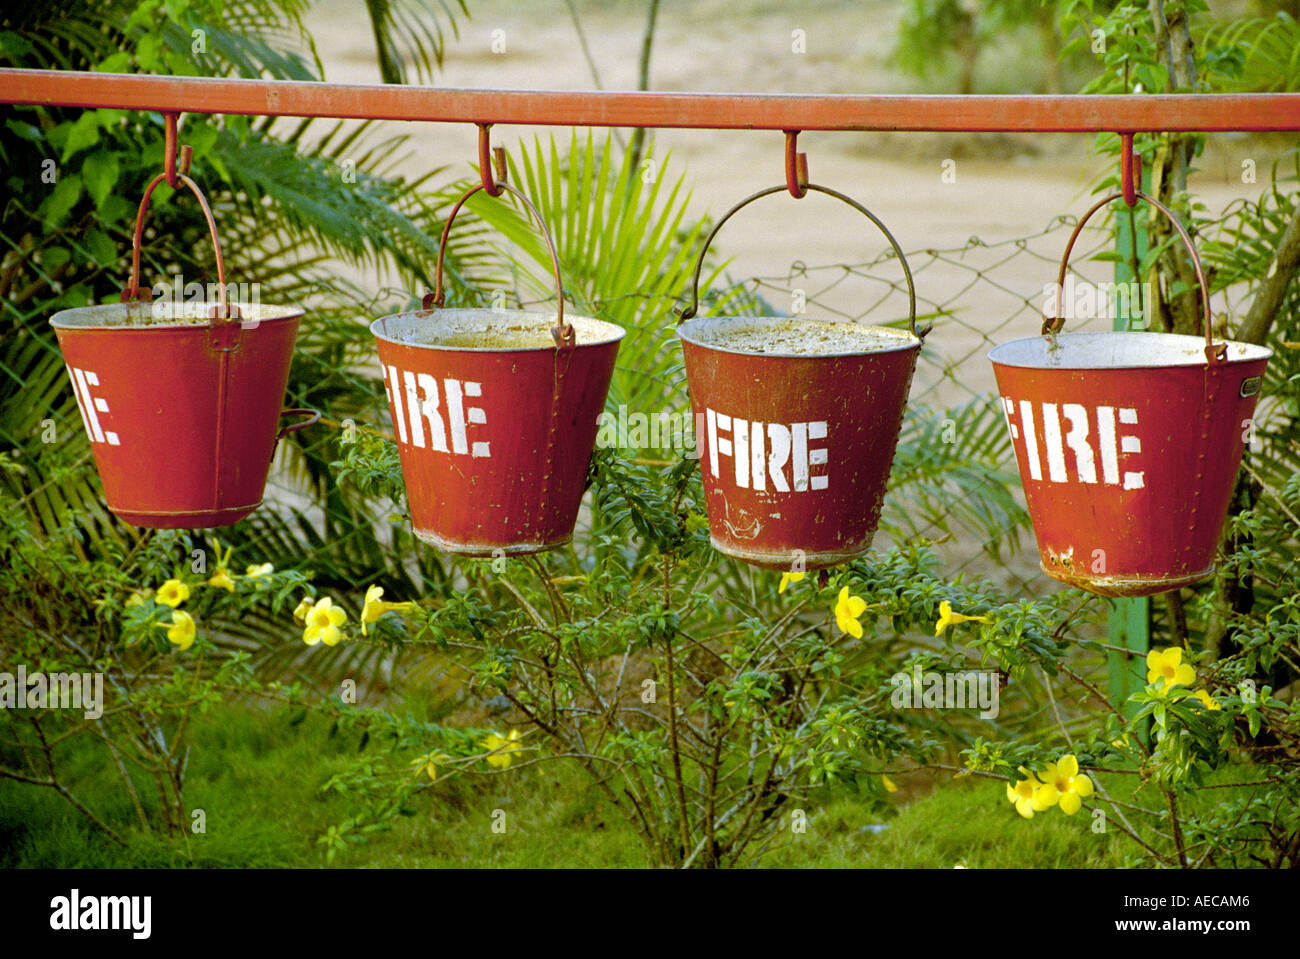 Four red buckets filled with sand and painted Fire hanged serially near a petrol bunk in Kerala India Stock Photo